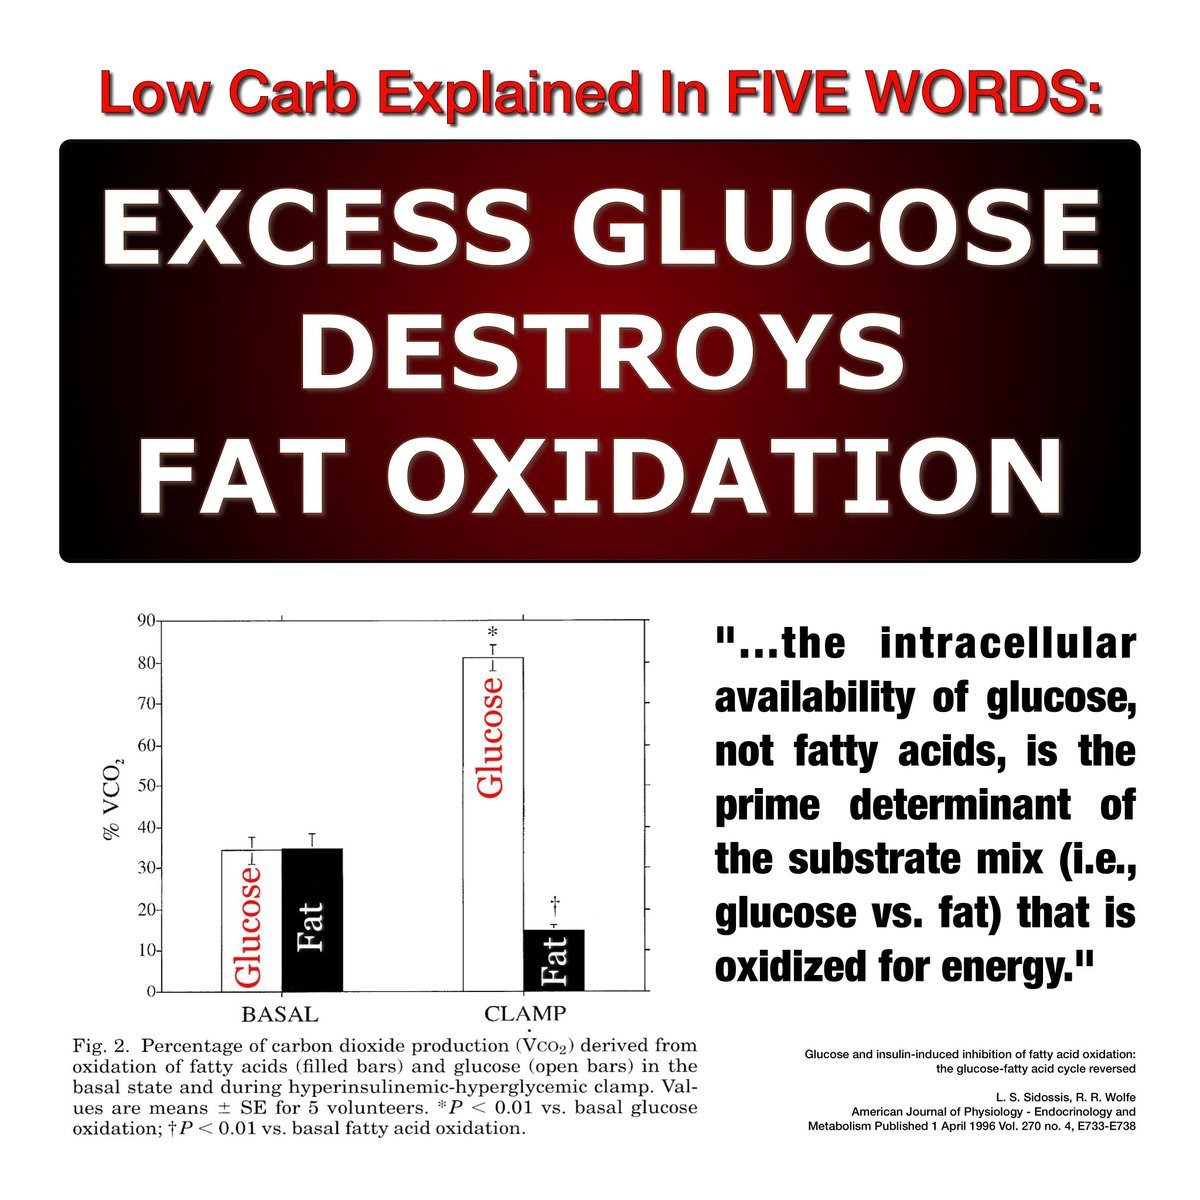 Excess Glucose and fat oxidation